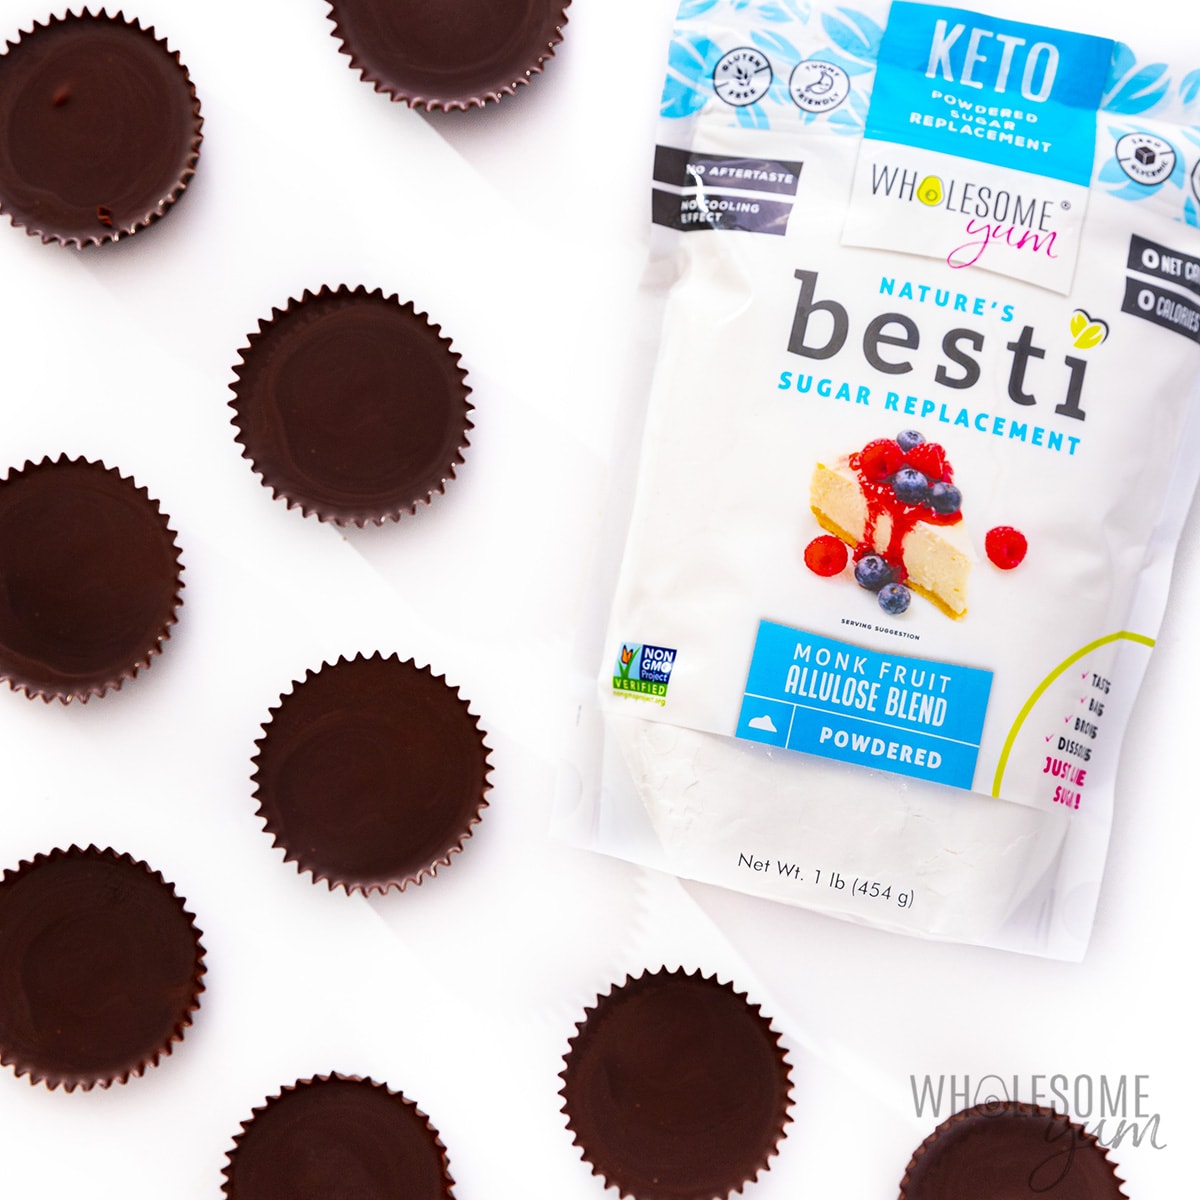 Finished keto peanut butter cups on white background next to Besti.